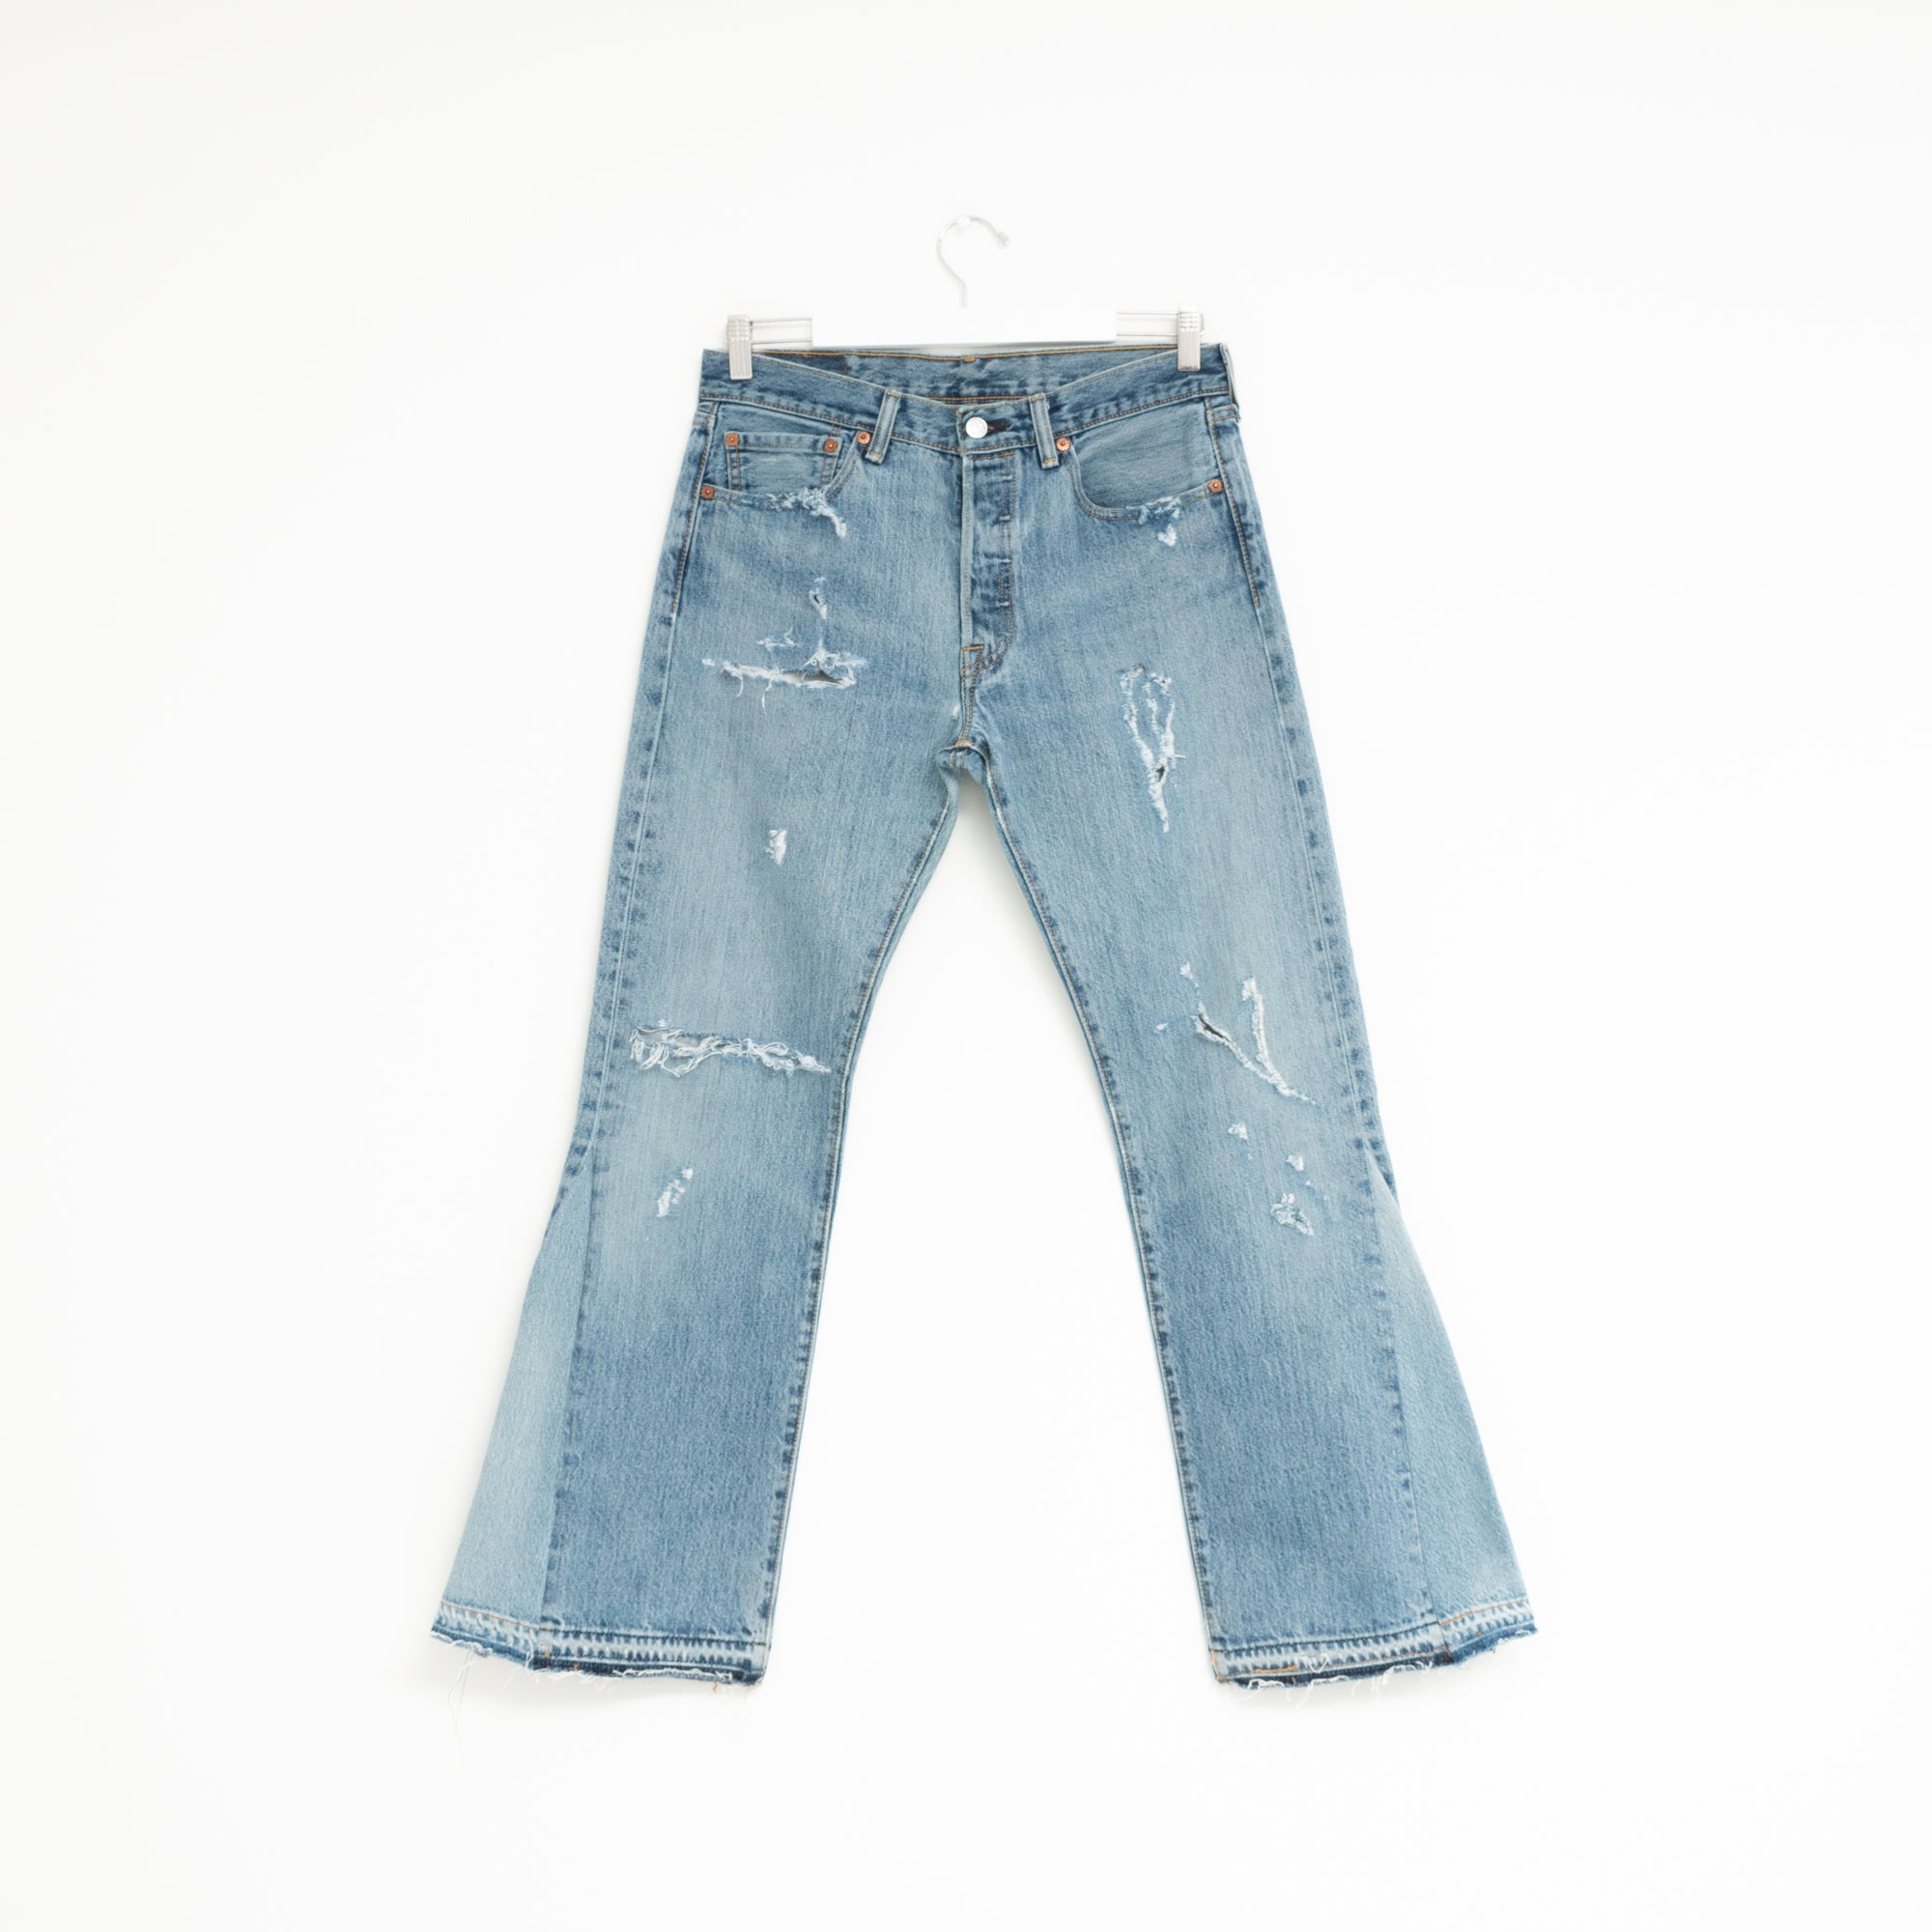 "FLARE" Jeans W32 L31